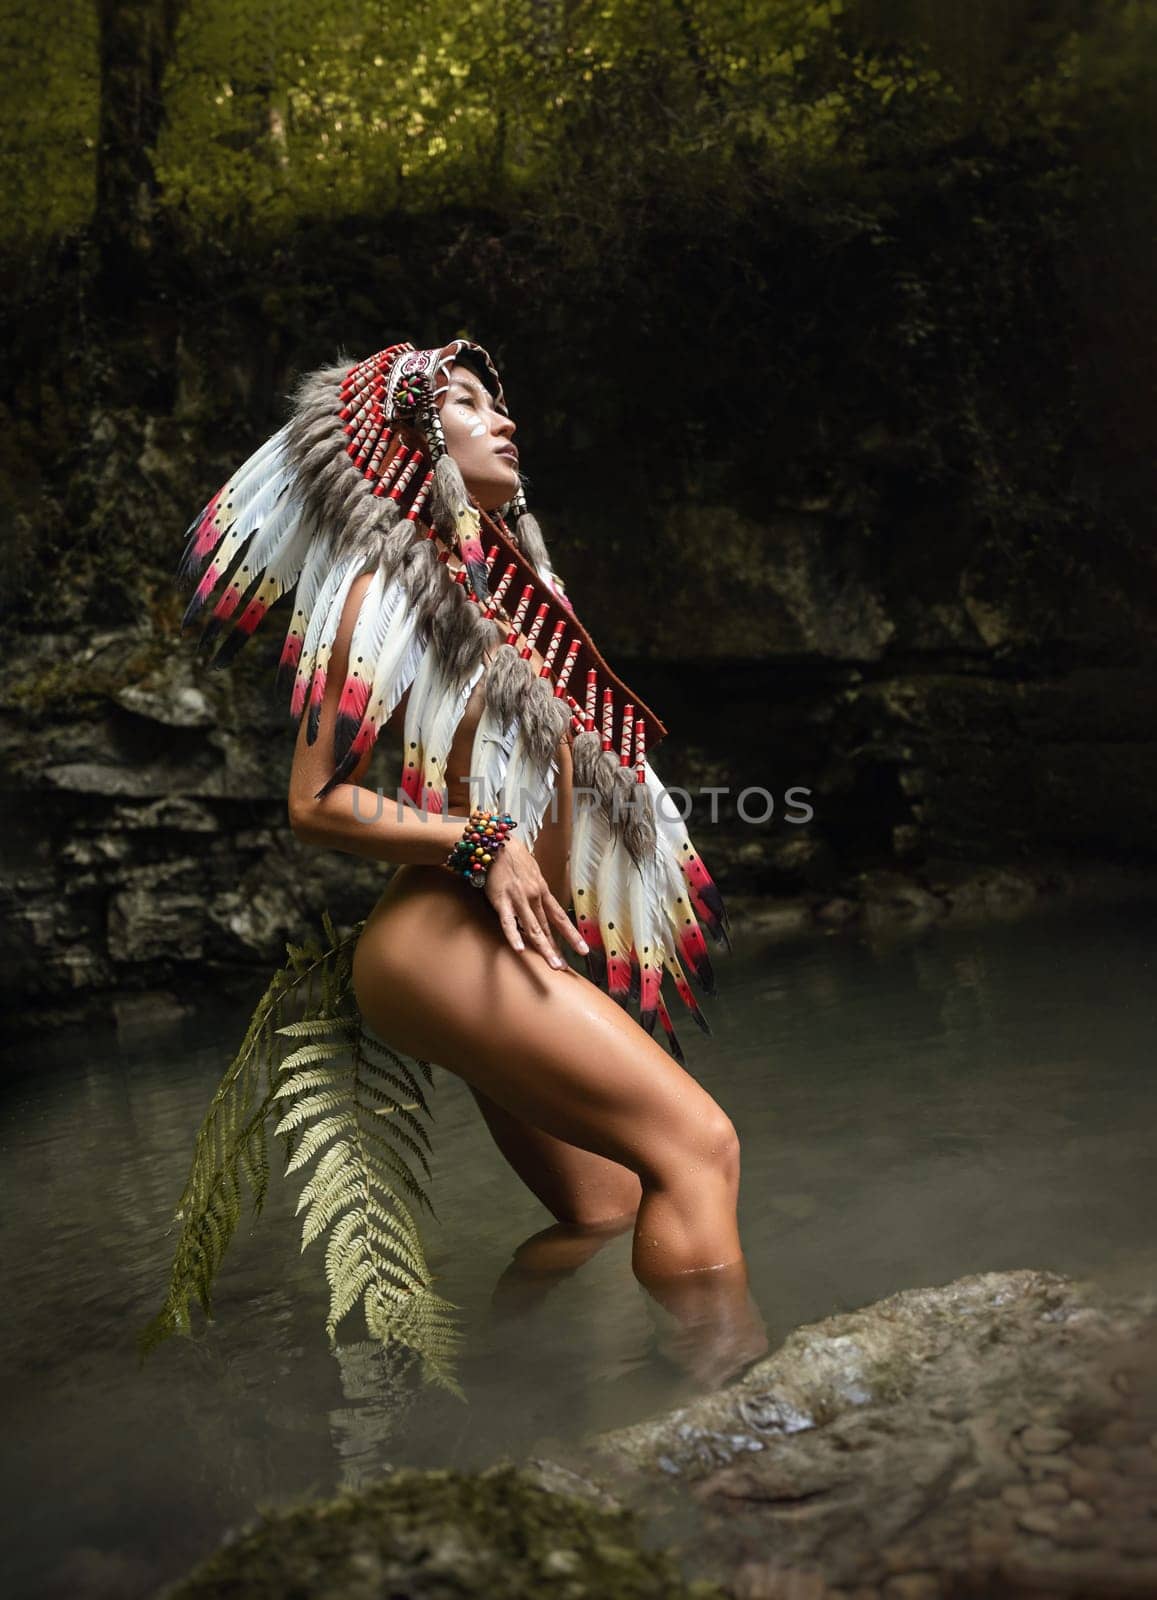 Naked girl in Native American headdresses poses sexually against the backdrop of wildlife by Rotozey